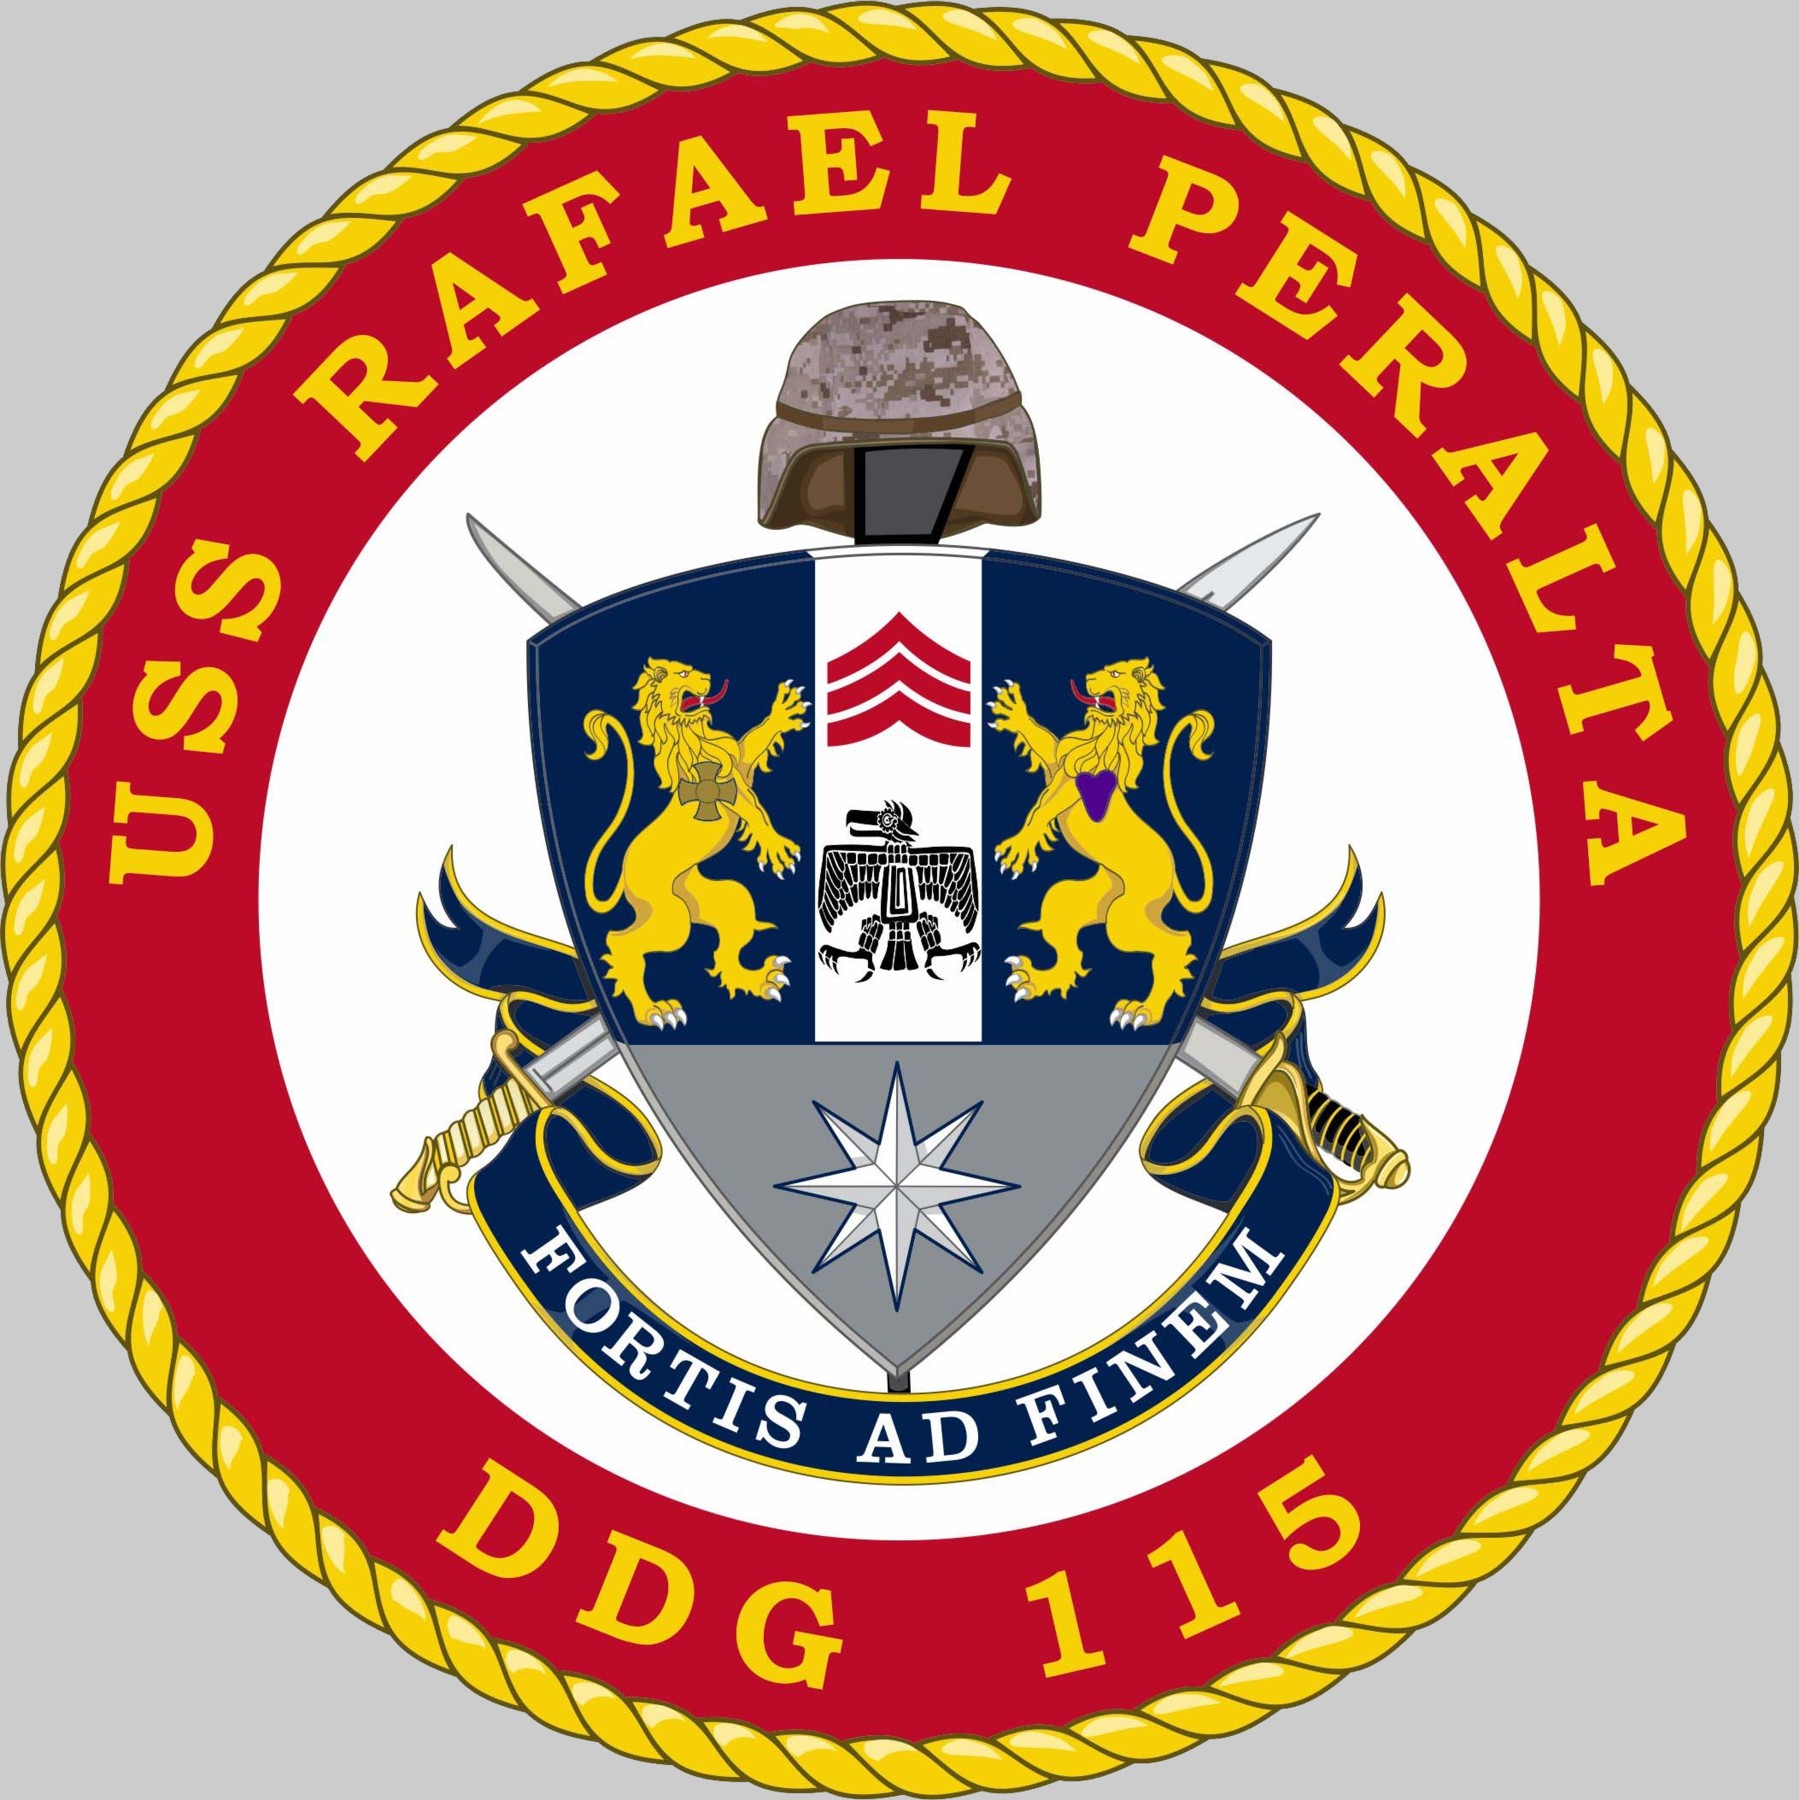 ddg-115 uss rafael peralta insignia crest patch badge arleigh burke class guided missile destroyer us navy aegis 02c